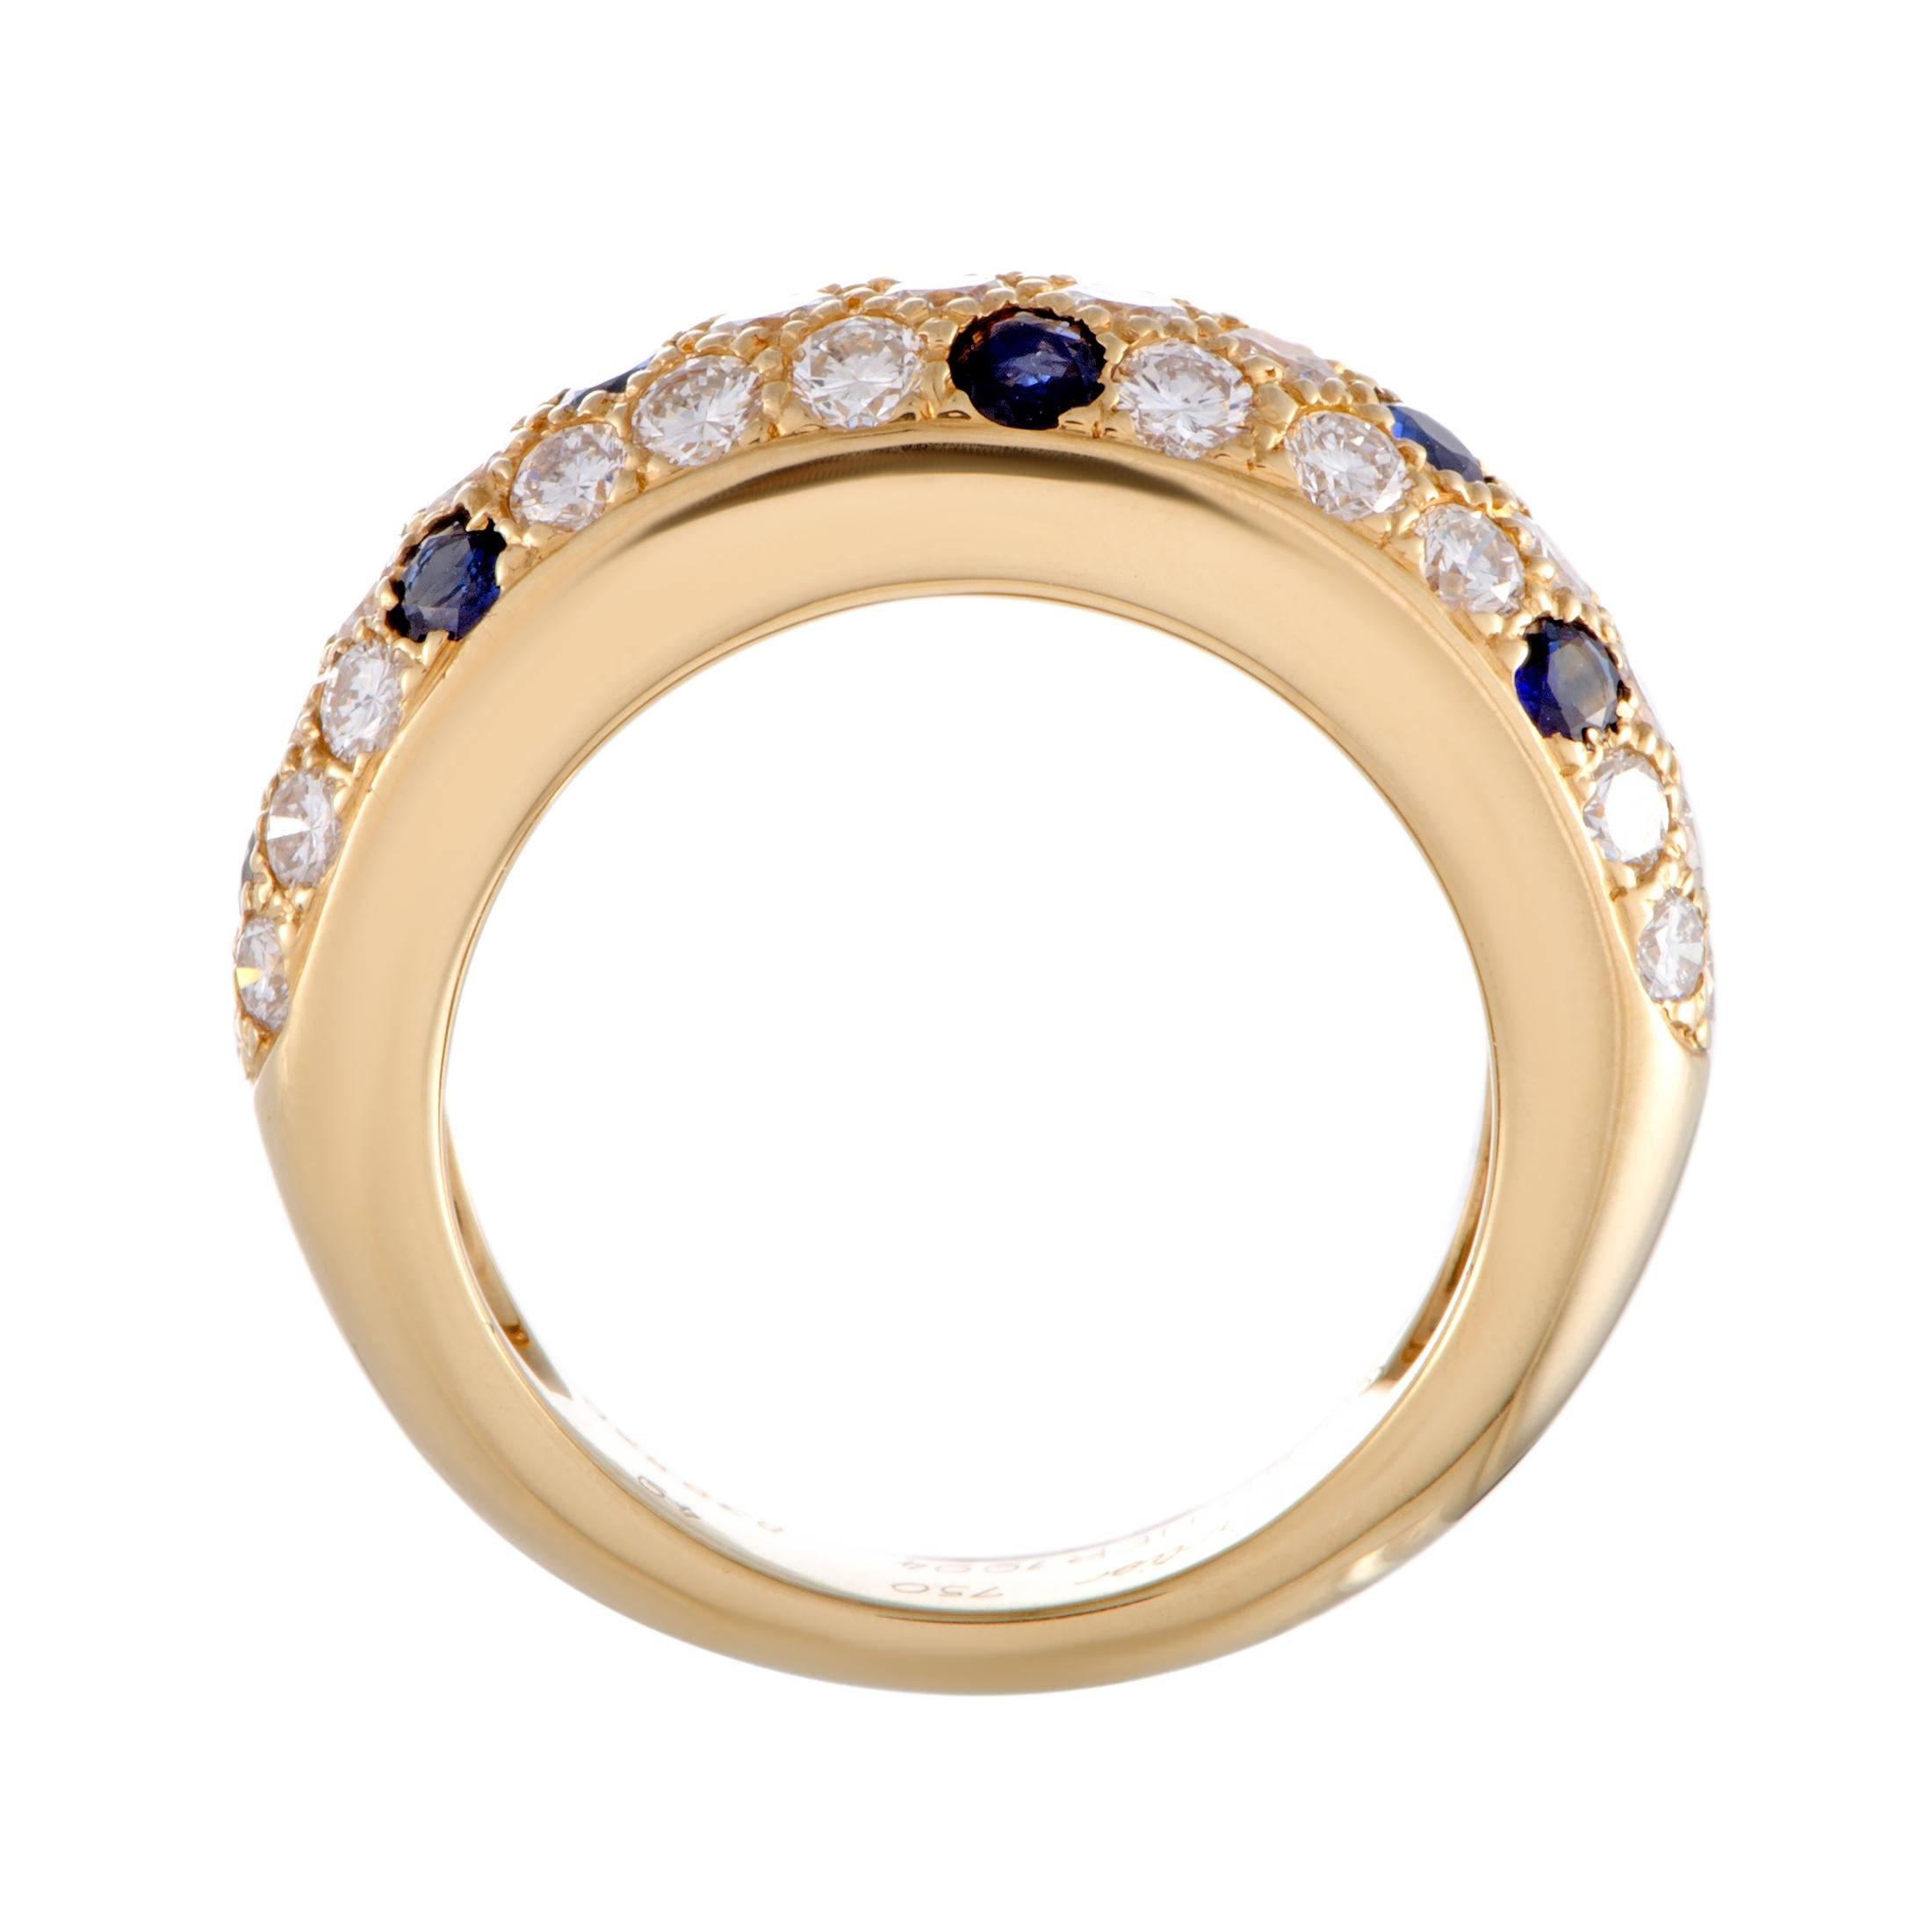 The enchanting radiance of 18K yellow gold brings out in a most luxurious fashion the sublime resplendence of diamonds and the regal allure of sapphires in this exceptional ring that is designed by Cartier. The diamonds boast grade E color and VS